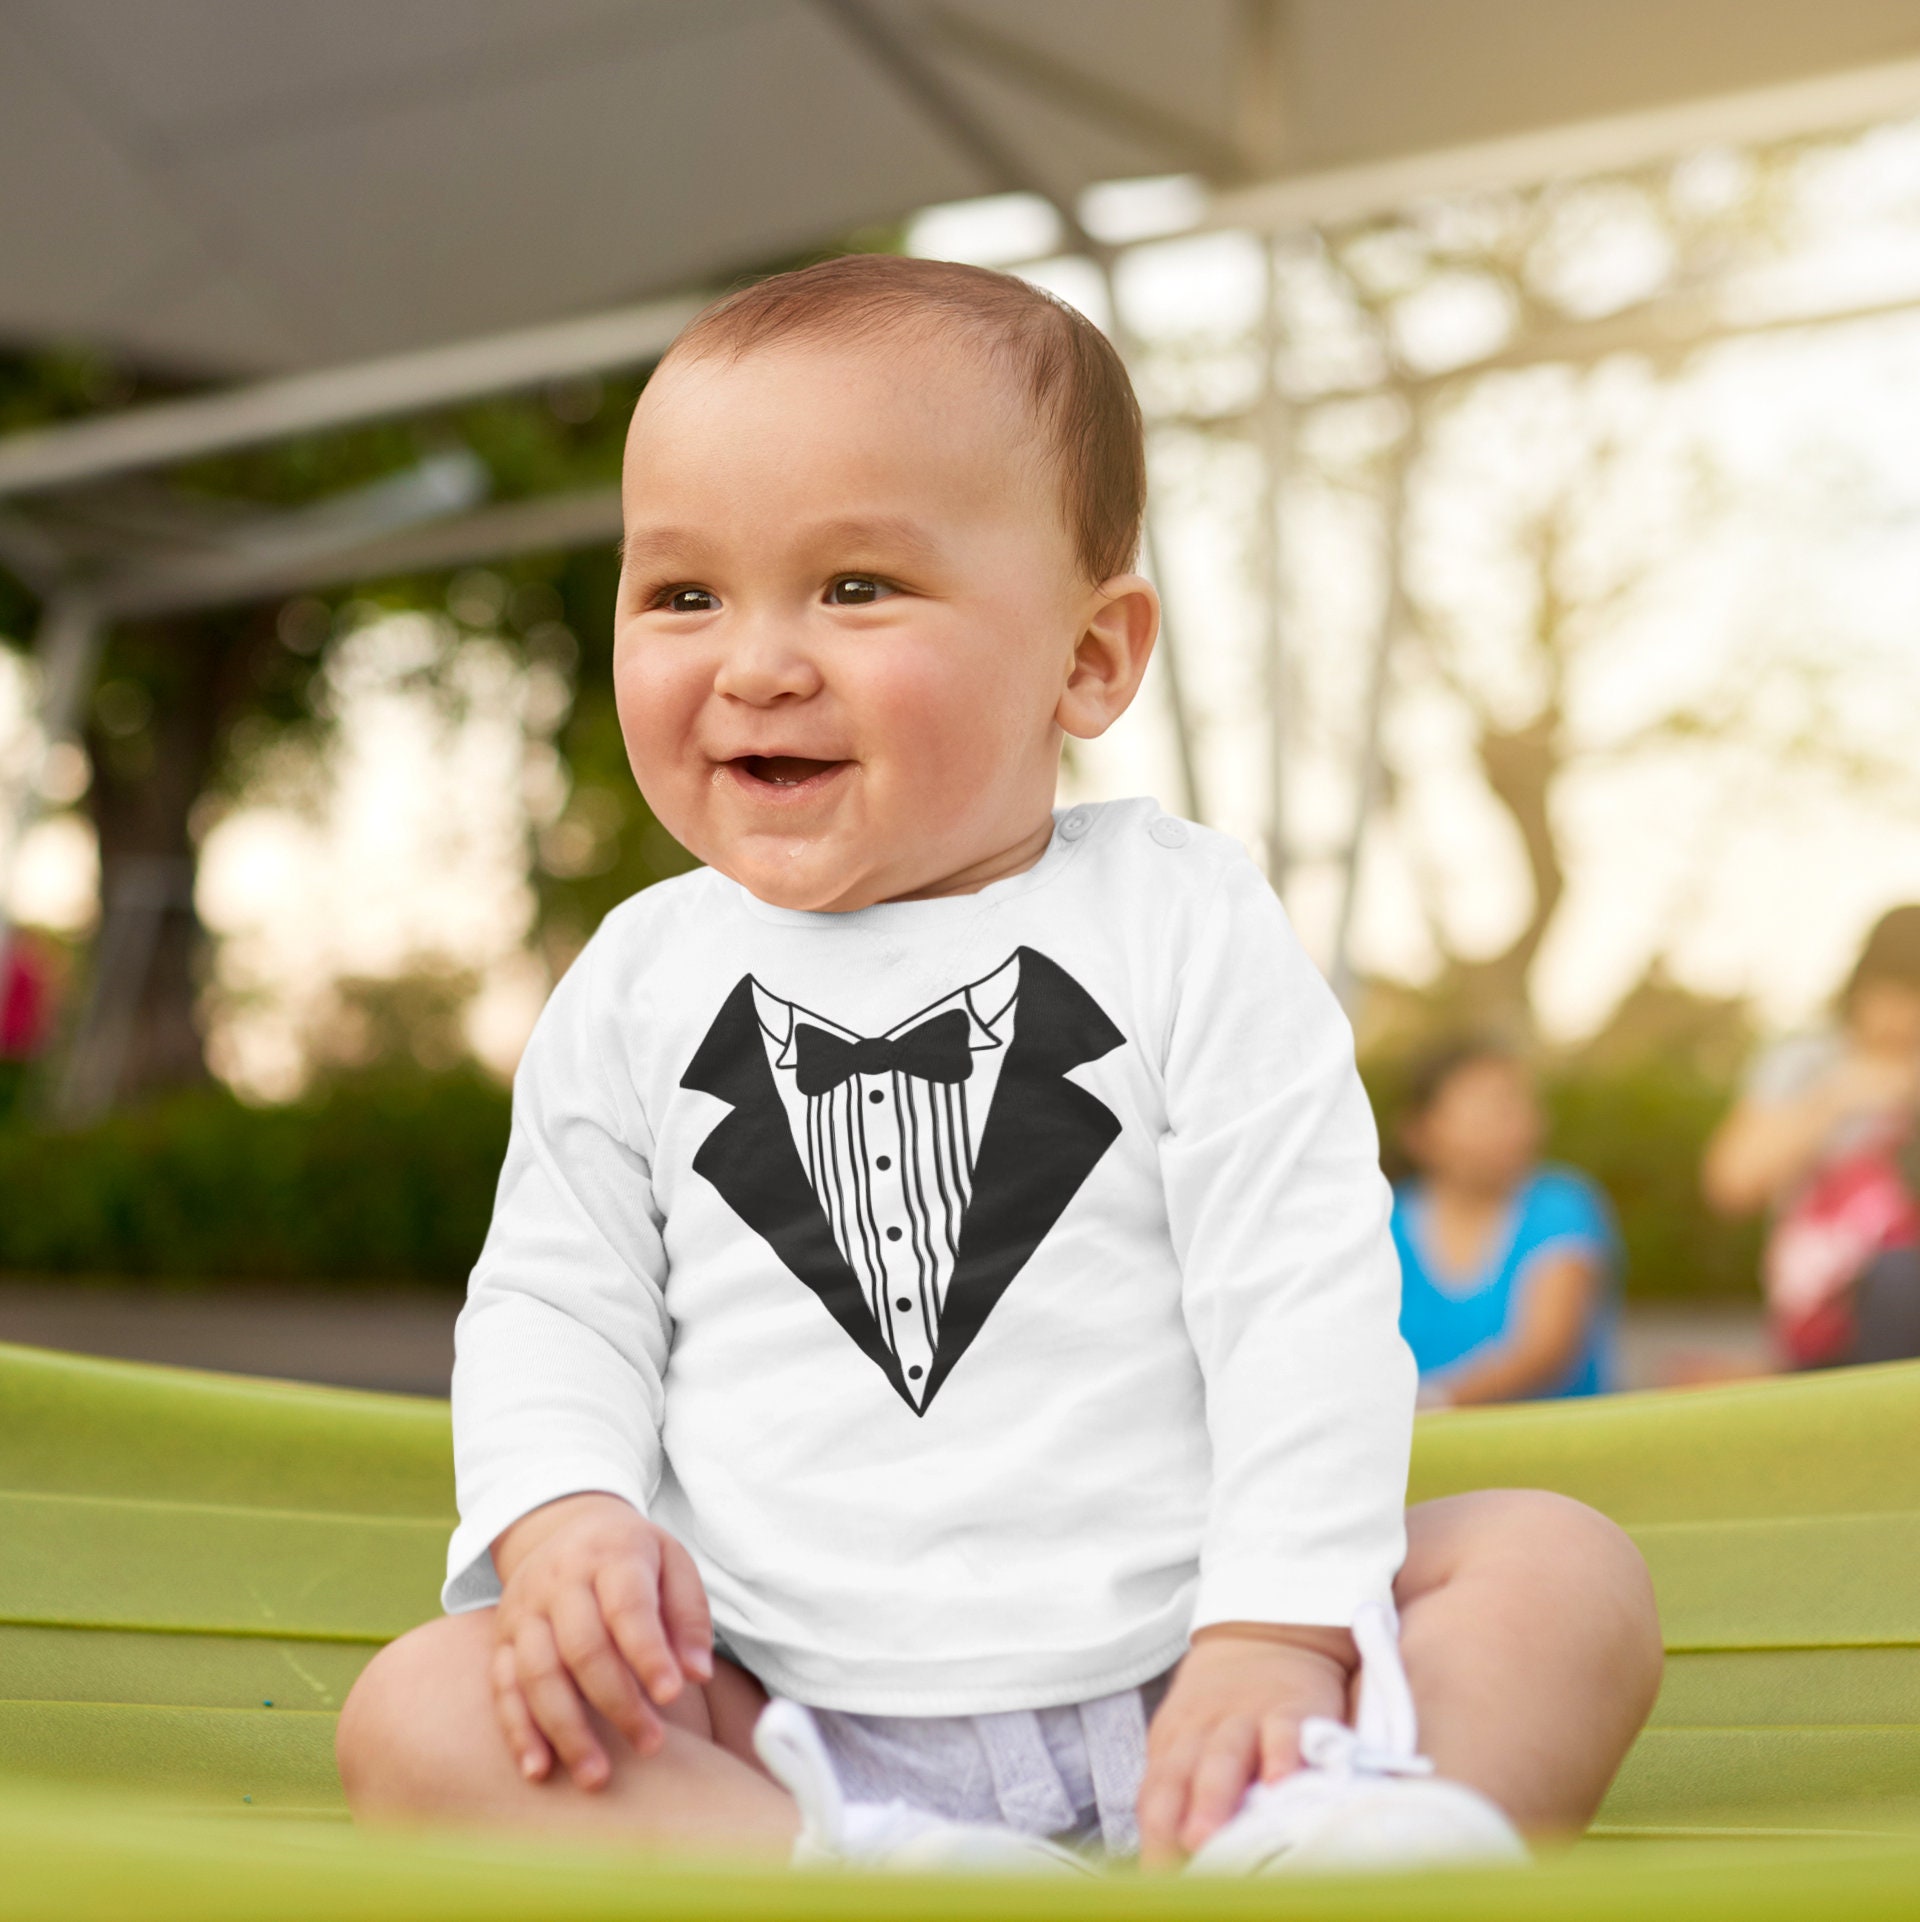 Jacquis Baby Boys Black and White Baby Tuxedo Suit 